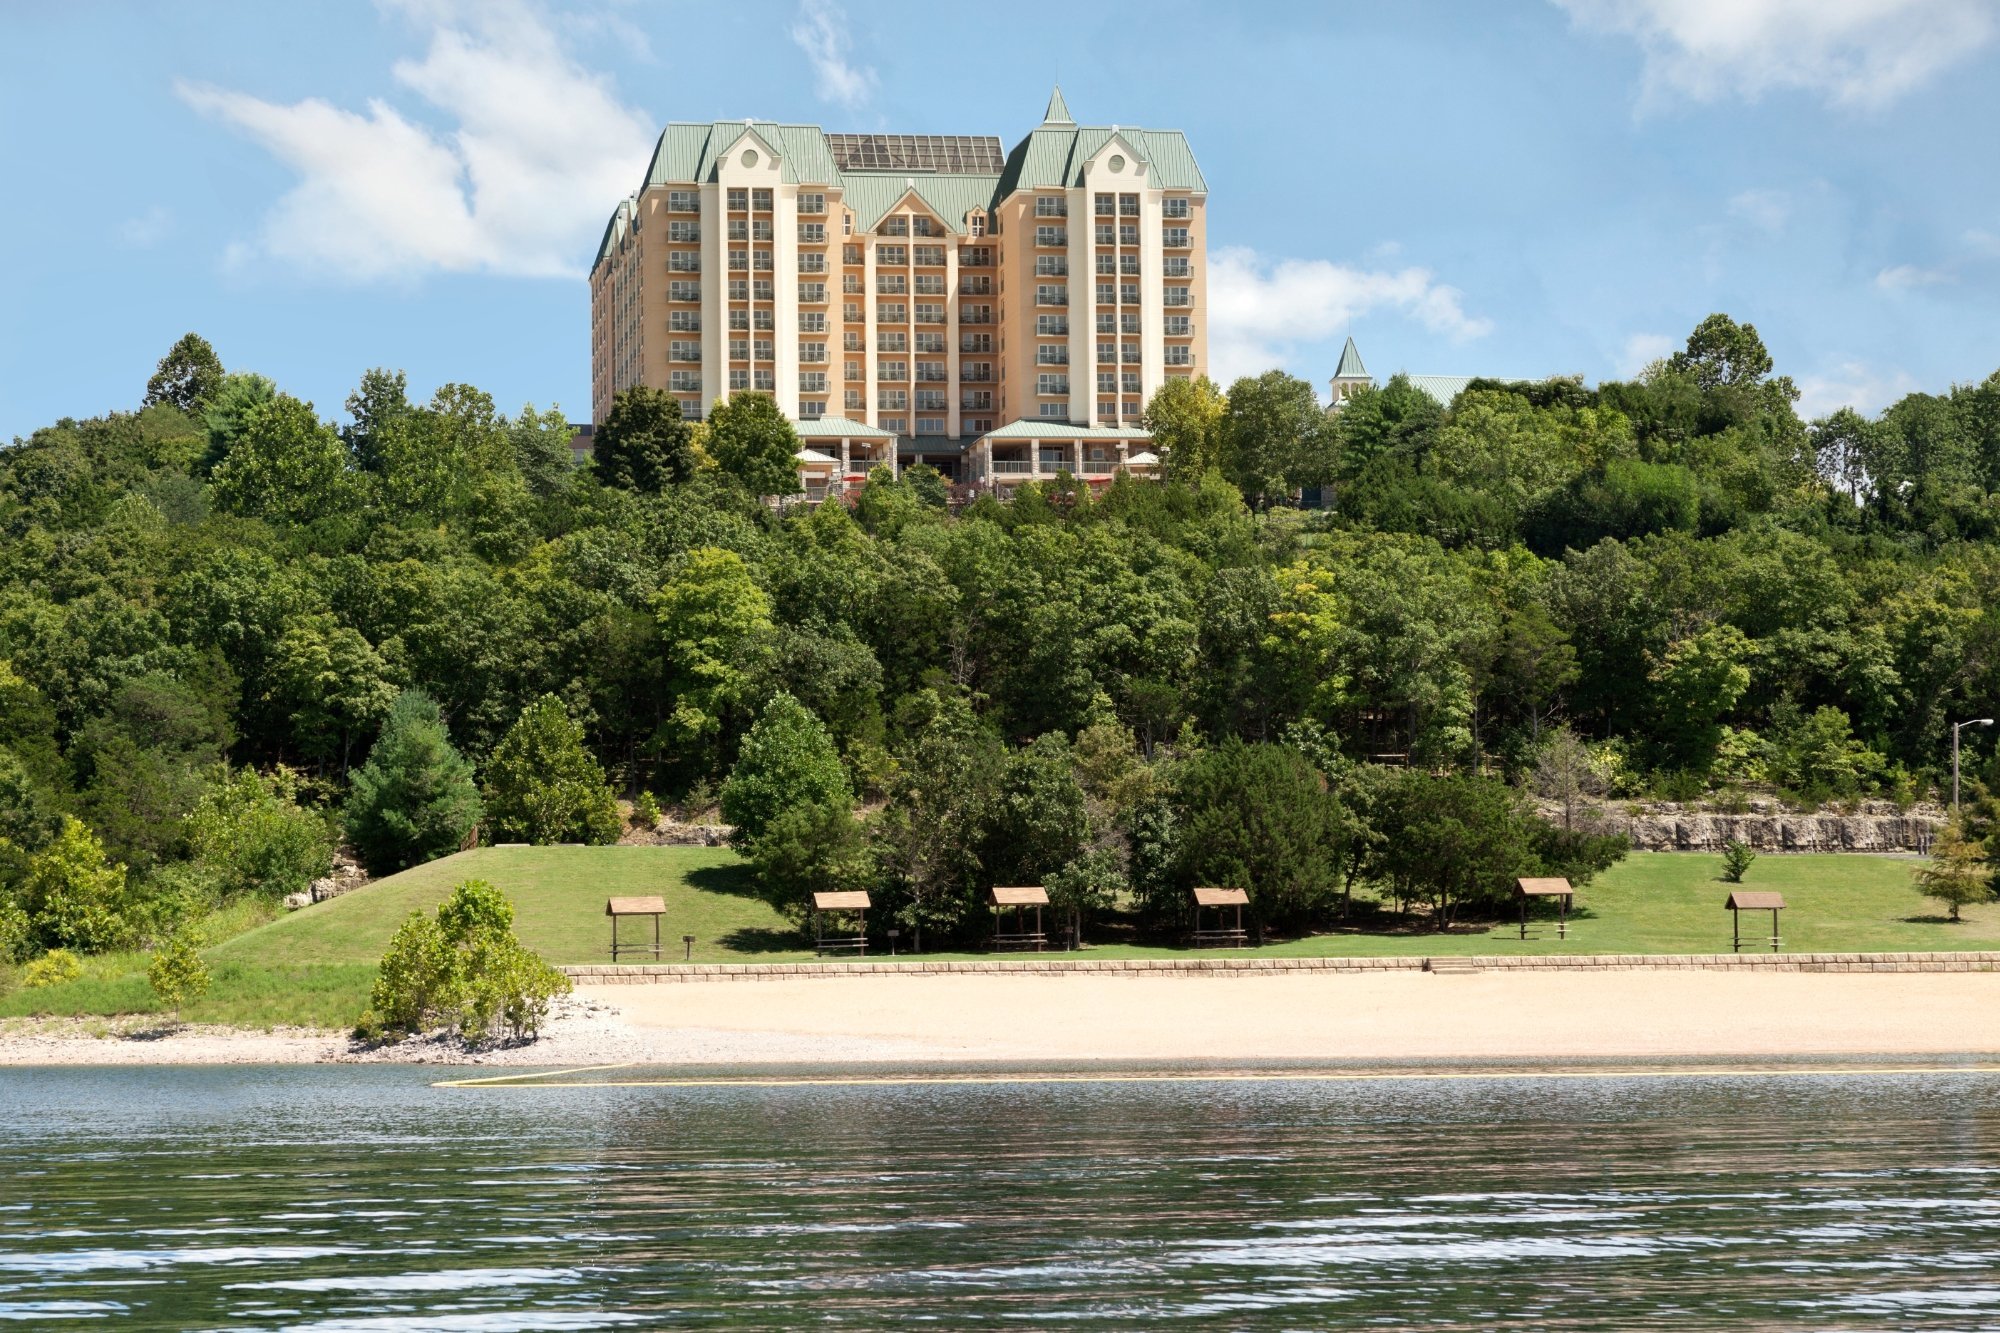 Photo of Chateau On The Lake Resort Hotel, Branson, MO